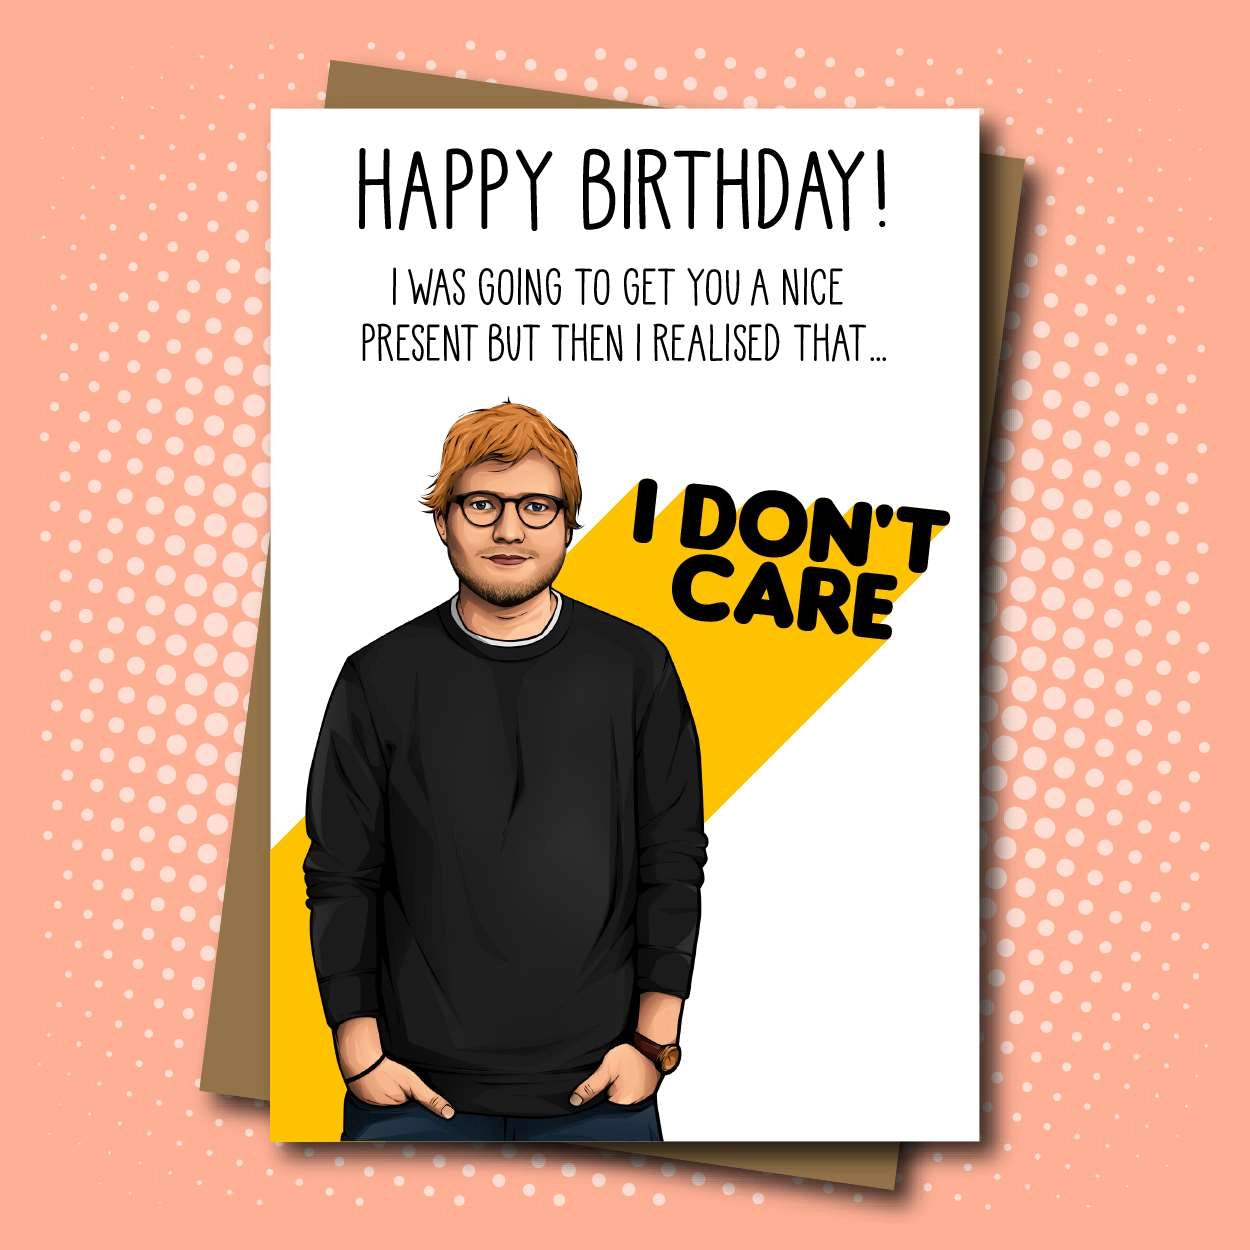 Happy Birthday! I Was Going To Get You A Nice Present But Then I Realized That I Don't Care - Jumbo Greeting Card - Mellow Monkey